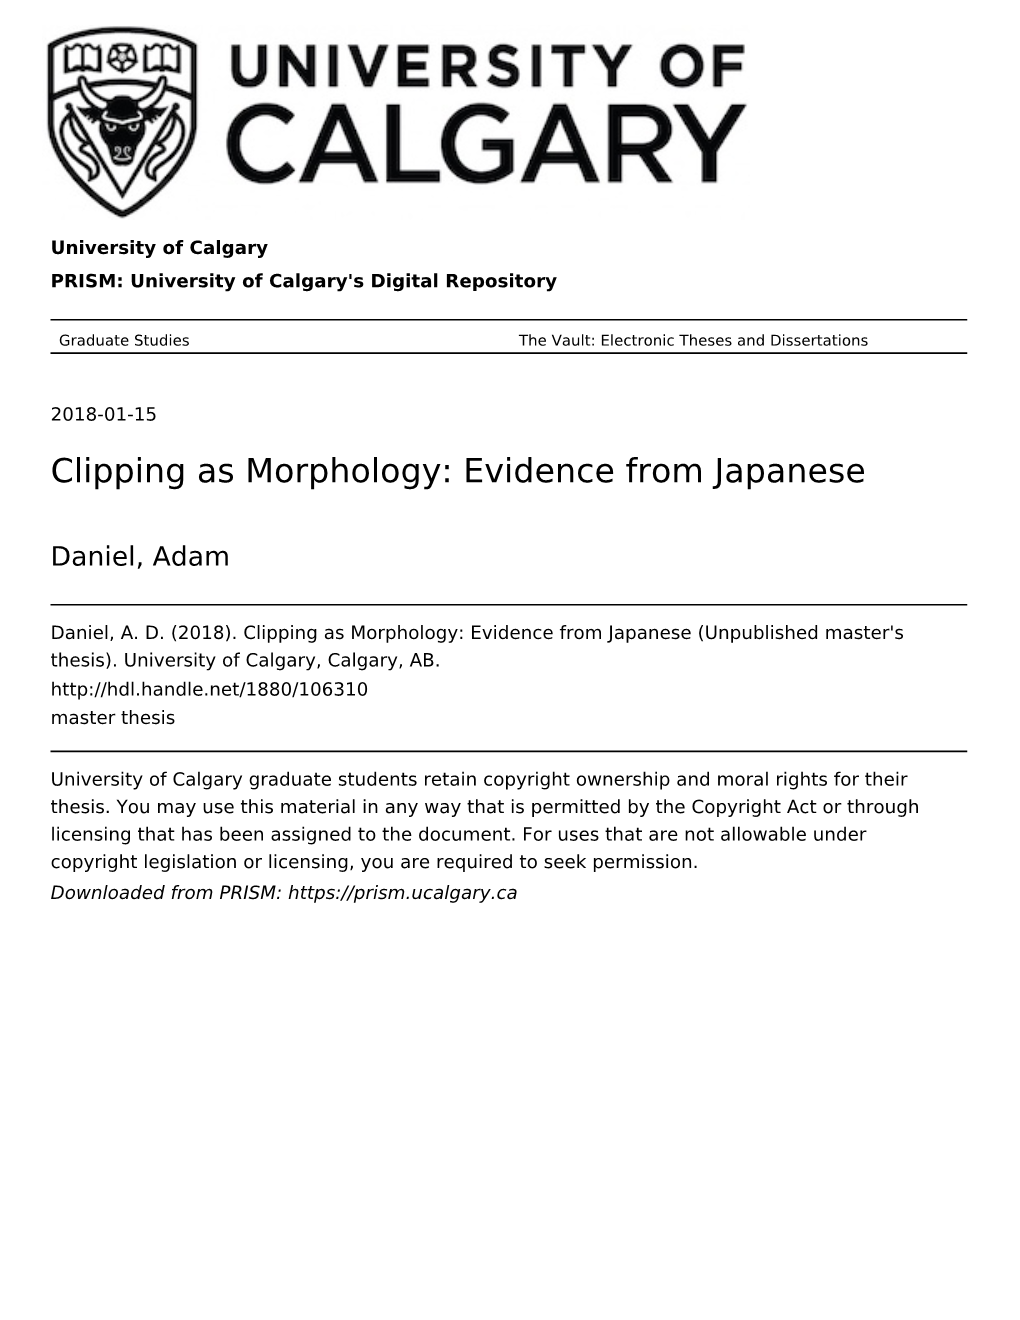 Clipping As Morphology: Evidence from Japanese